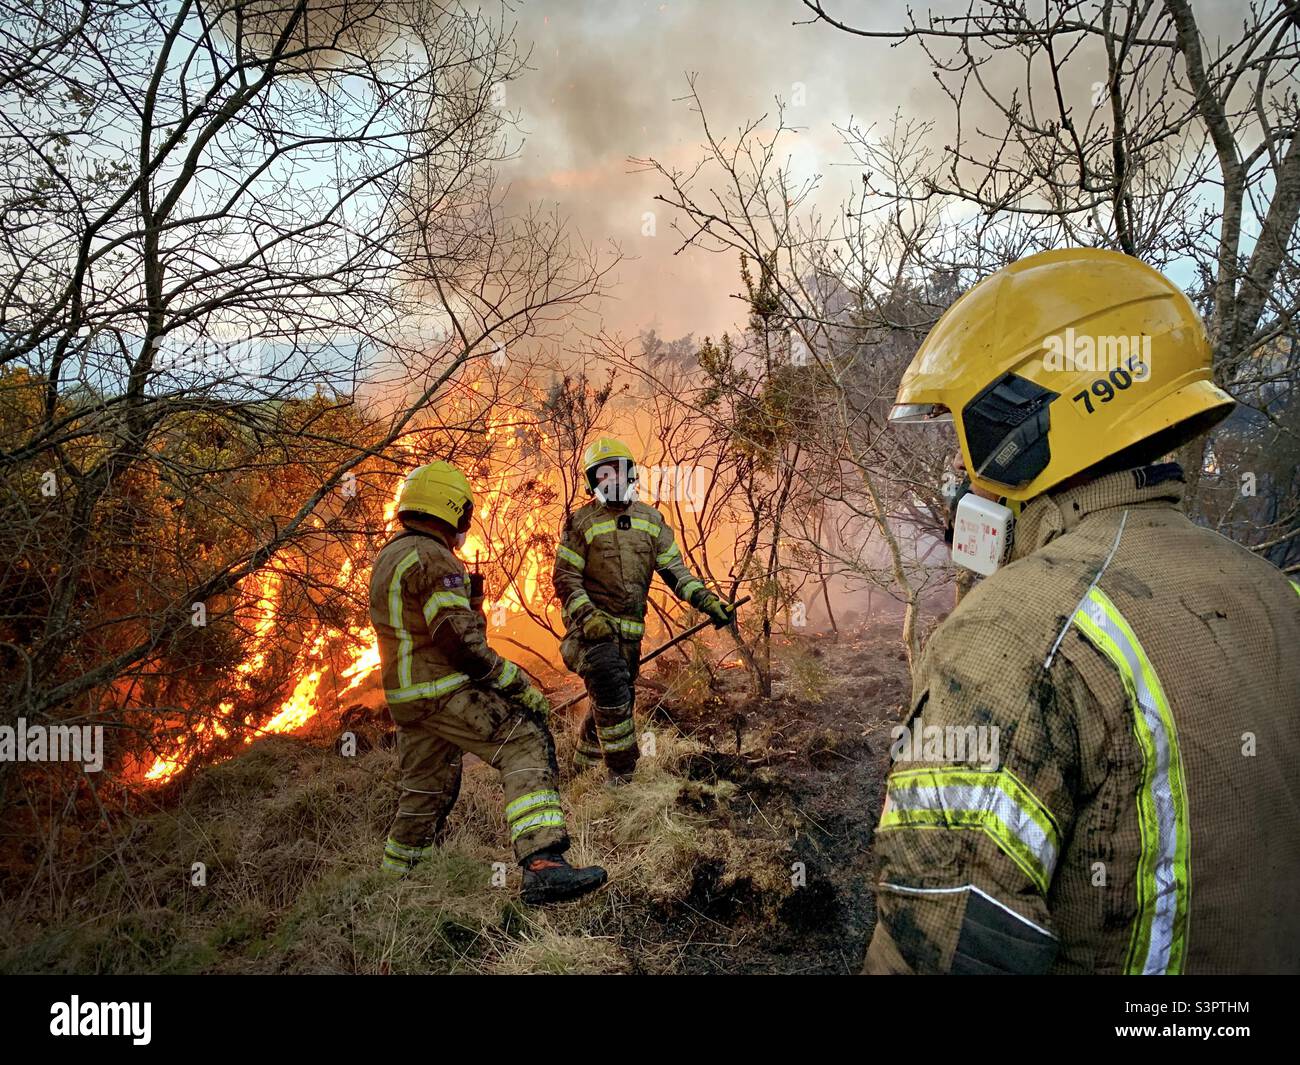 Firefighters on the scene of a wildfire on heathland near Yateley in Hampshire. Stock Photo